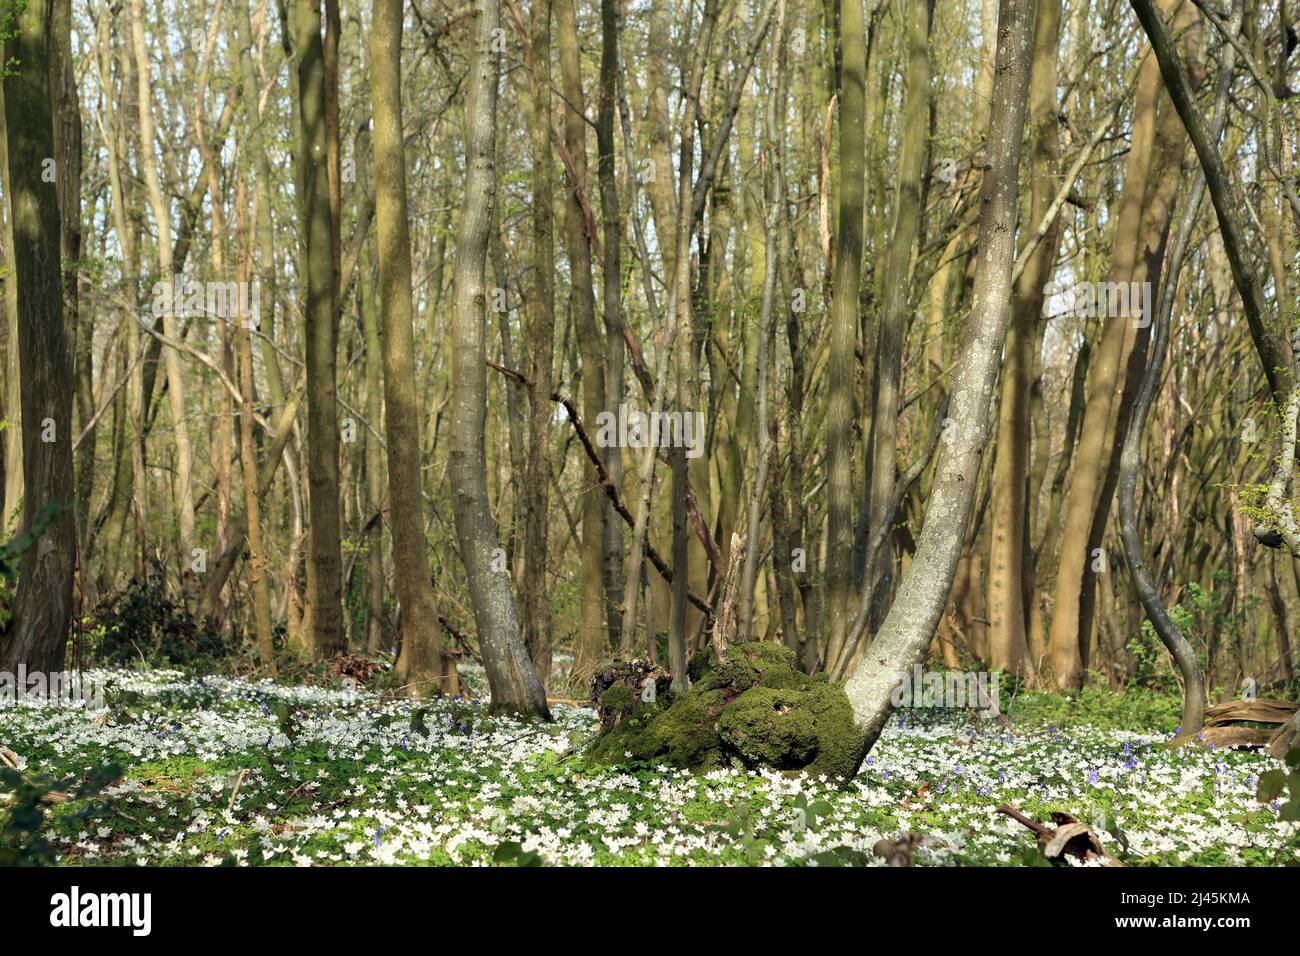 Wood anemones on woodland floor and tree trunks in Spong Wood nature reserve in the Kent North Downs near Elmsted, Ashford, Kent, England, United King Stock Photo